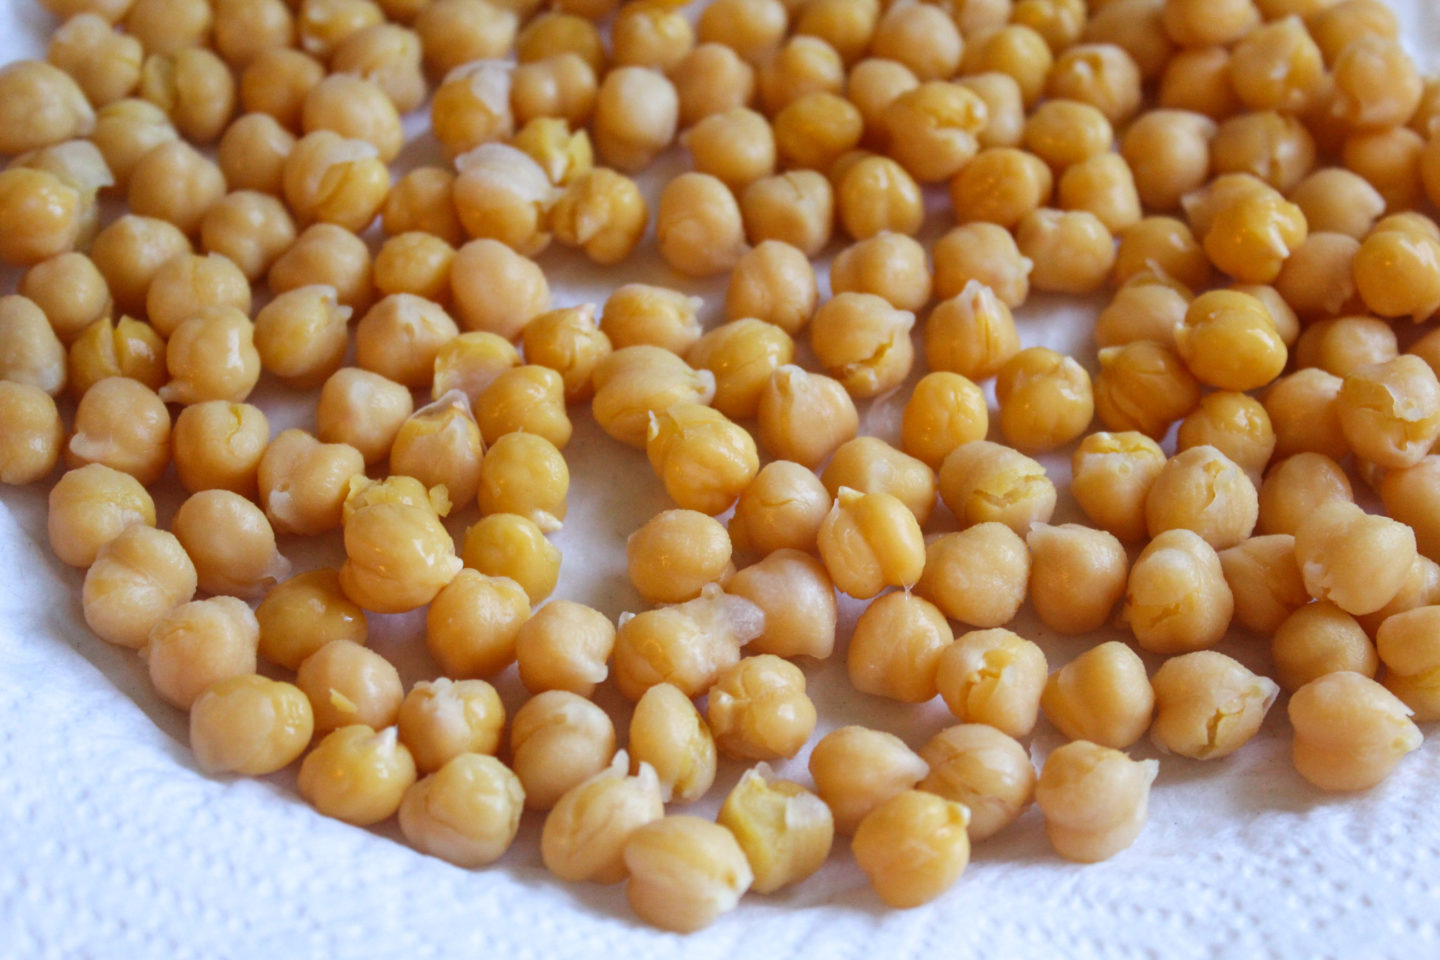 Learn how to roast chickpeas today!